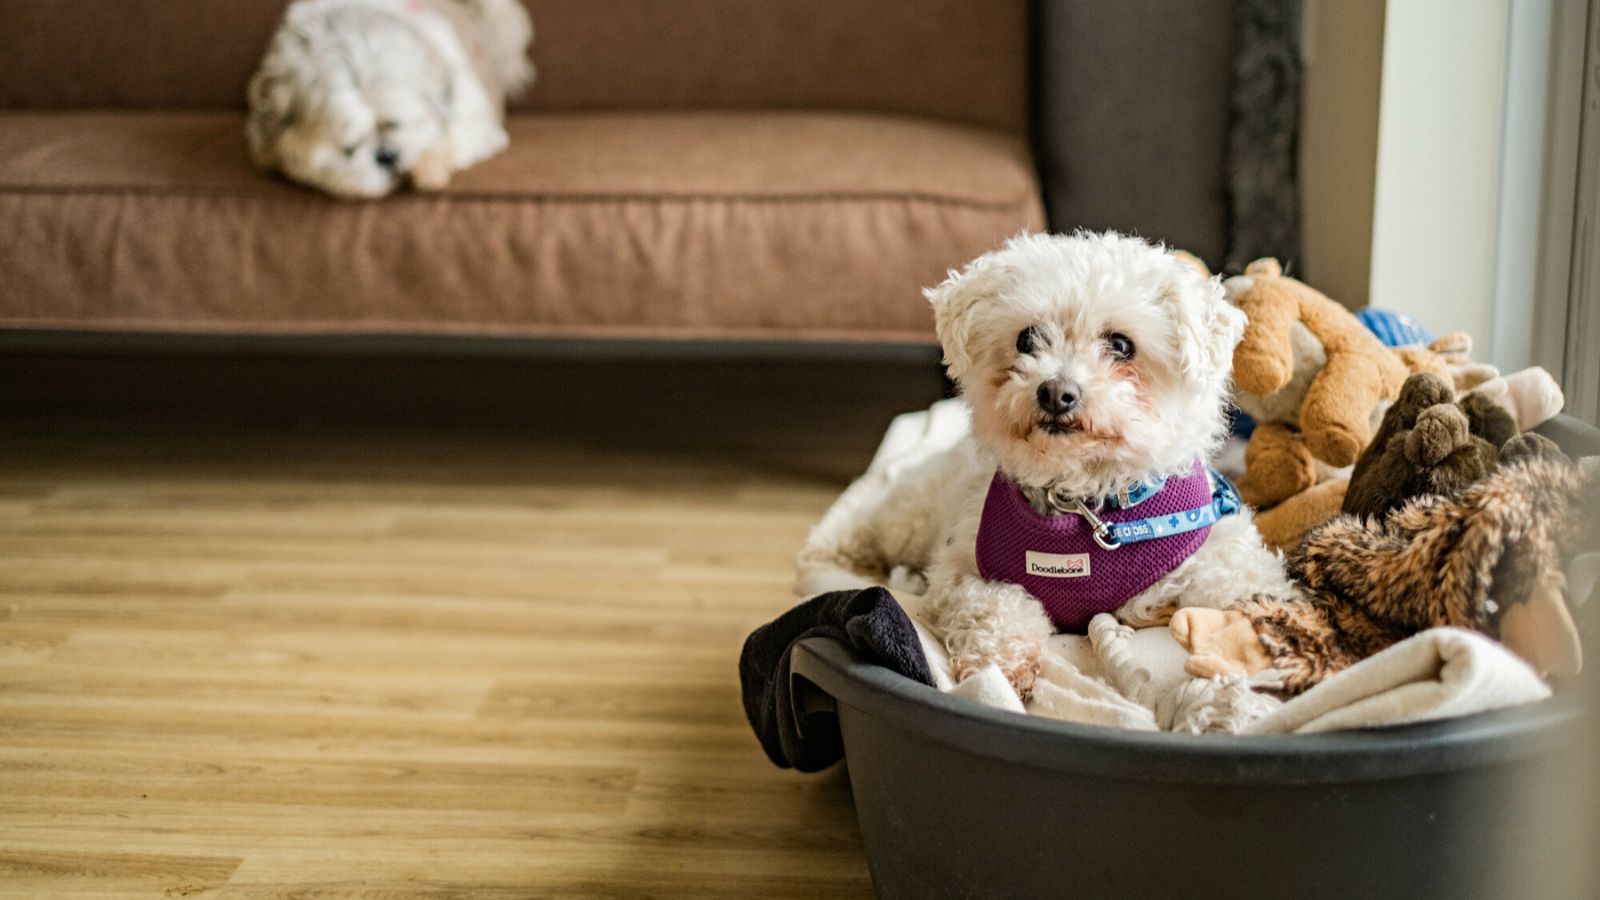 A bichon frise dog sits in their bed, surrounded by soft toys.